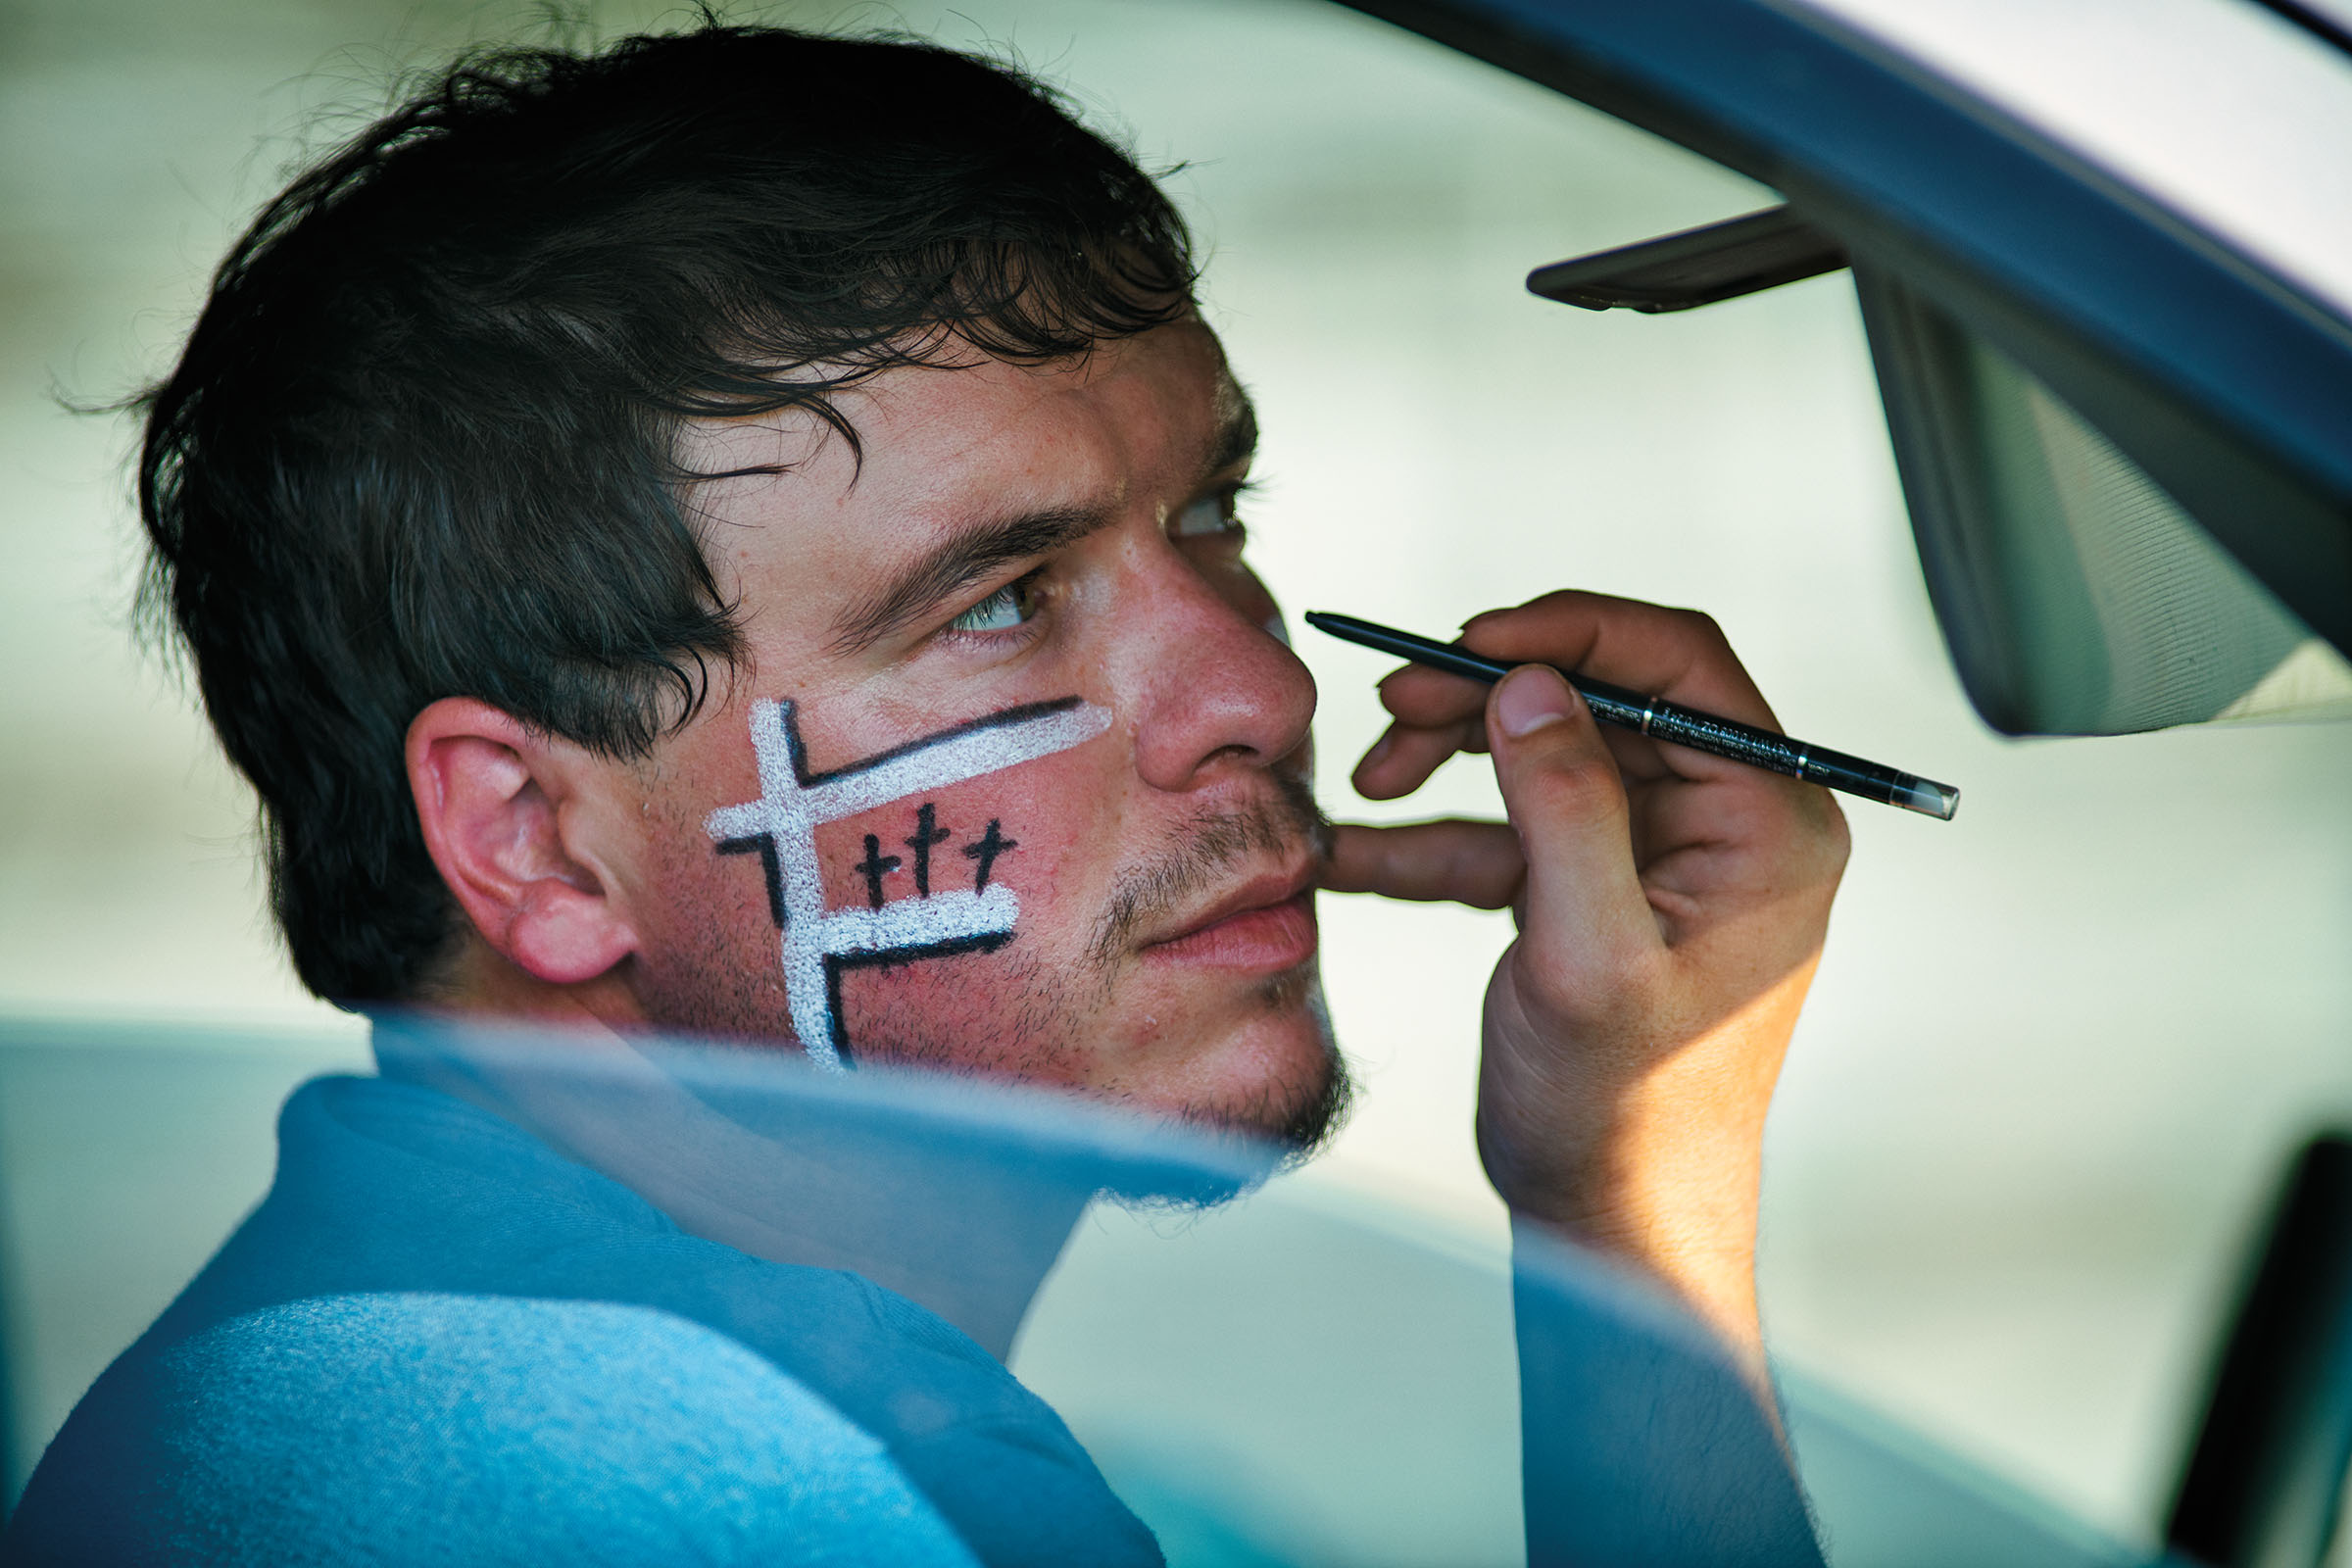 A man looks straight ahead as a small paintbrush applies paint to his nose area